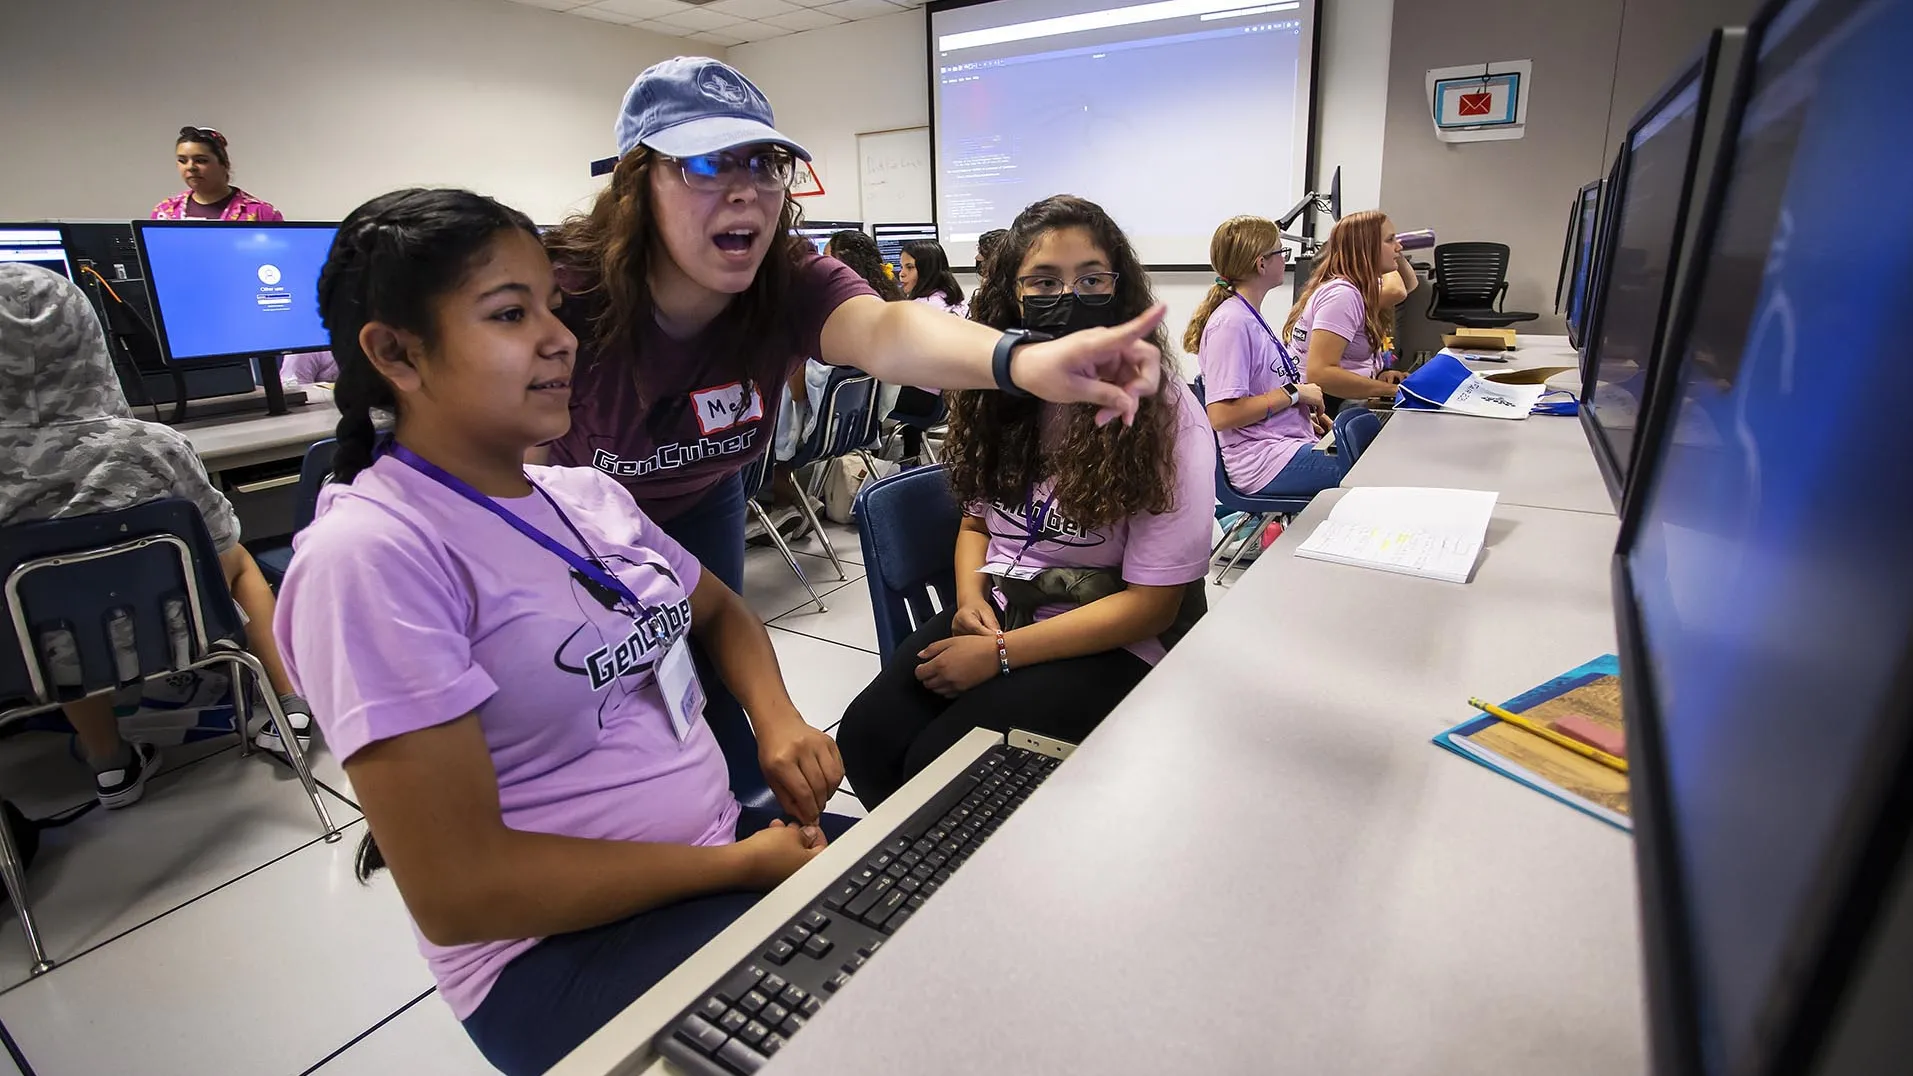 Two Girl Scouts (seated) and their cybersecurity camp instructor at a computer.